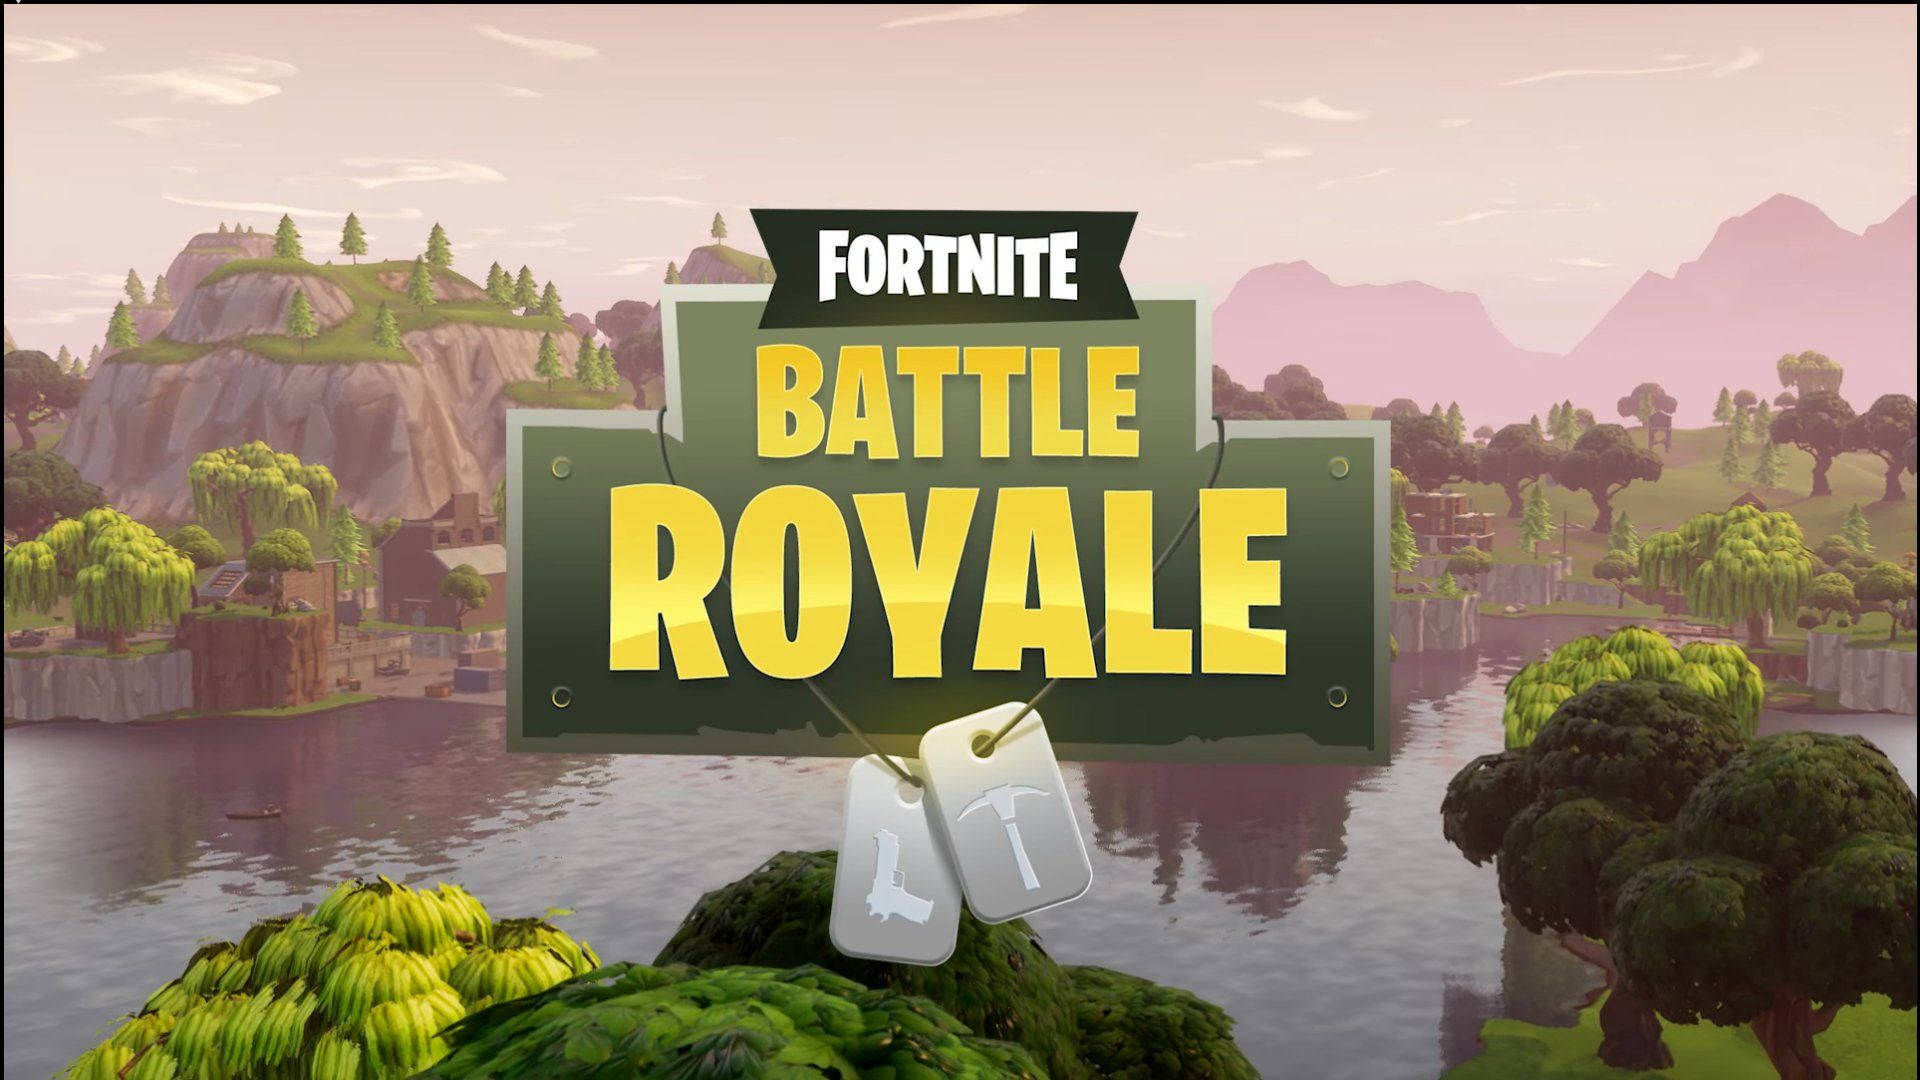 "Battle your way to the top of Cool Fortnite Battle Royale and become the undisputed champion!" Wallpaper